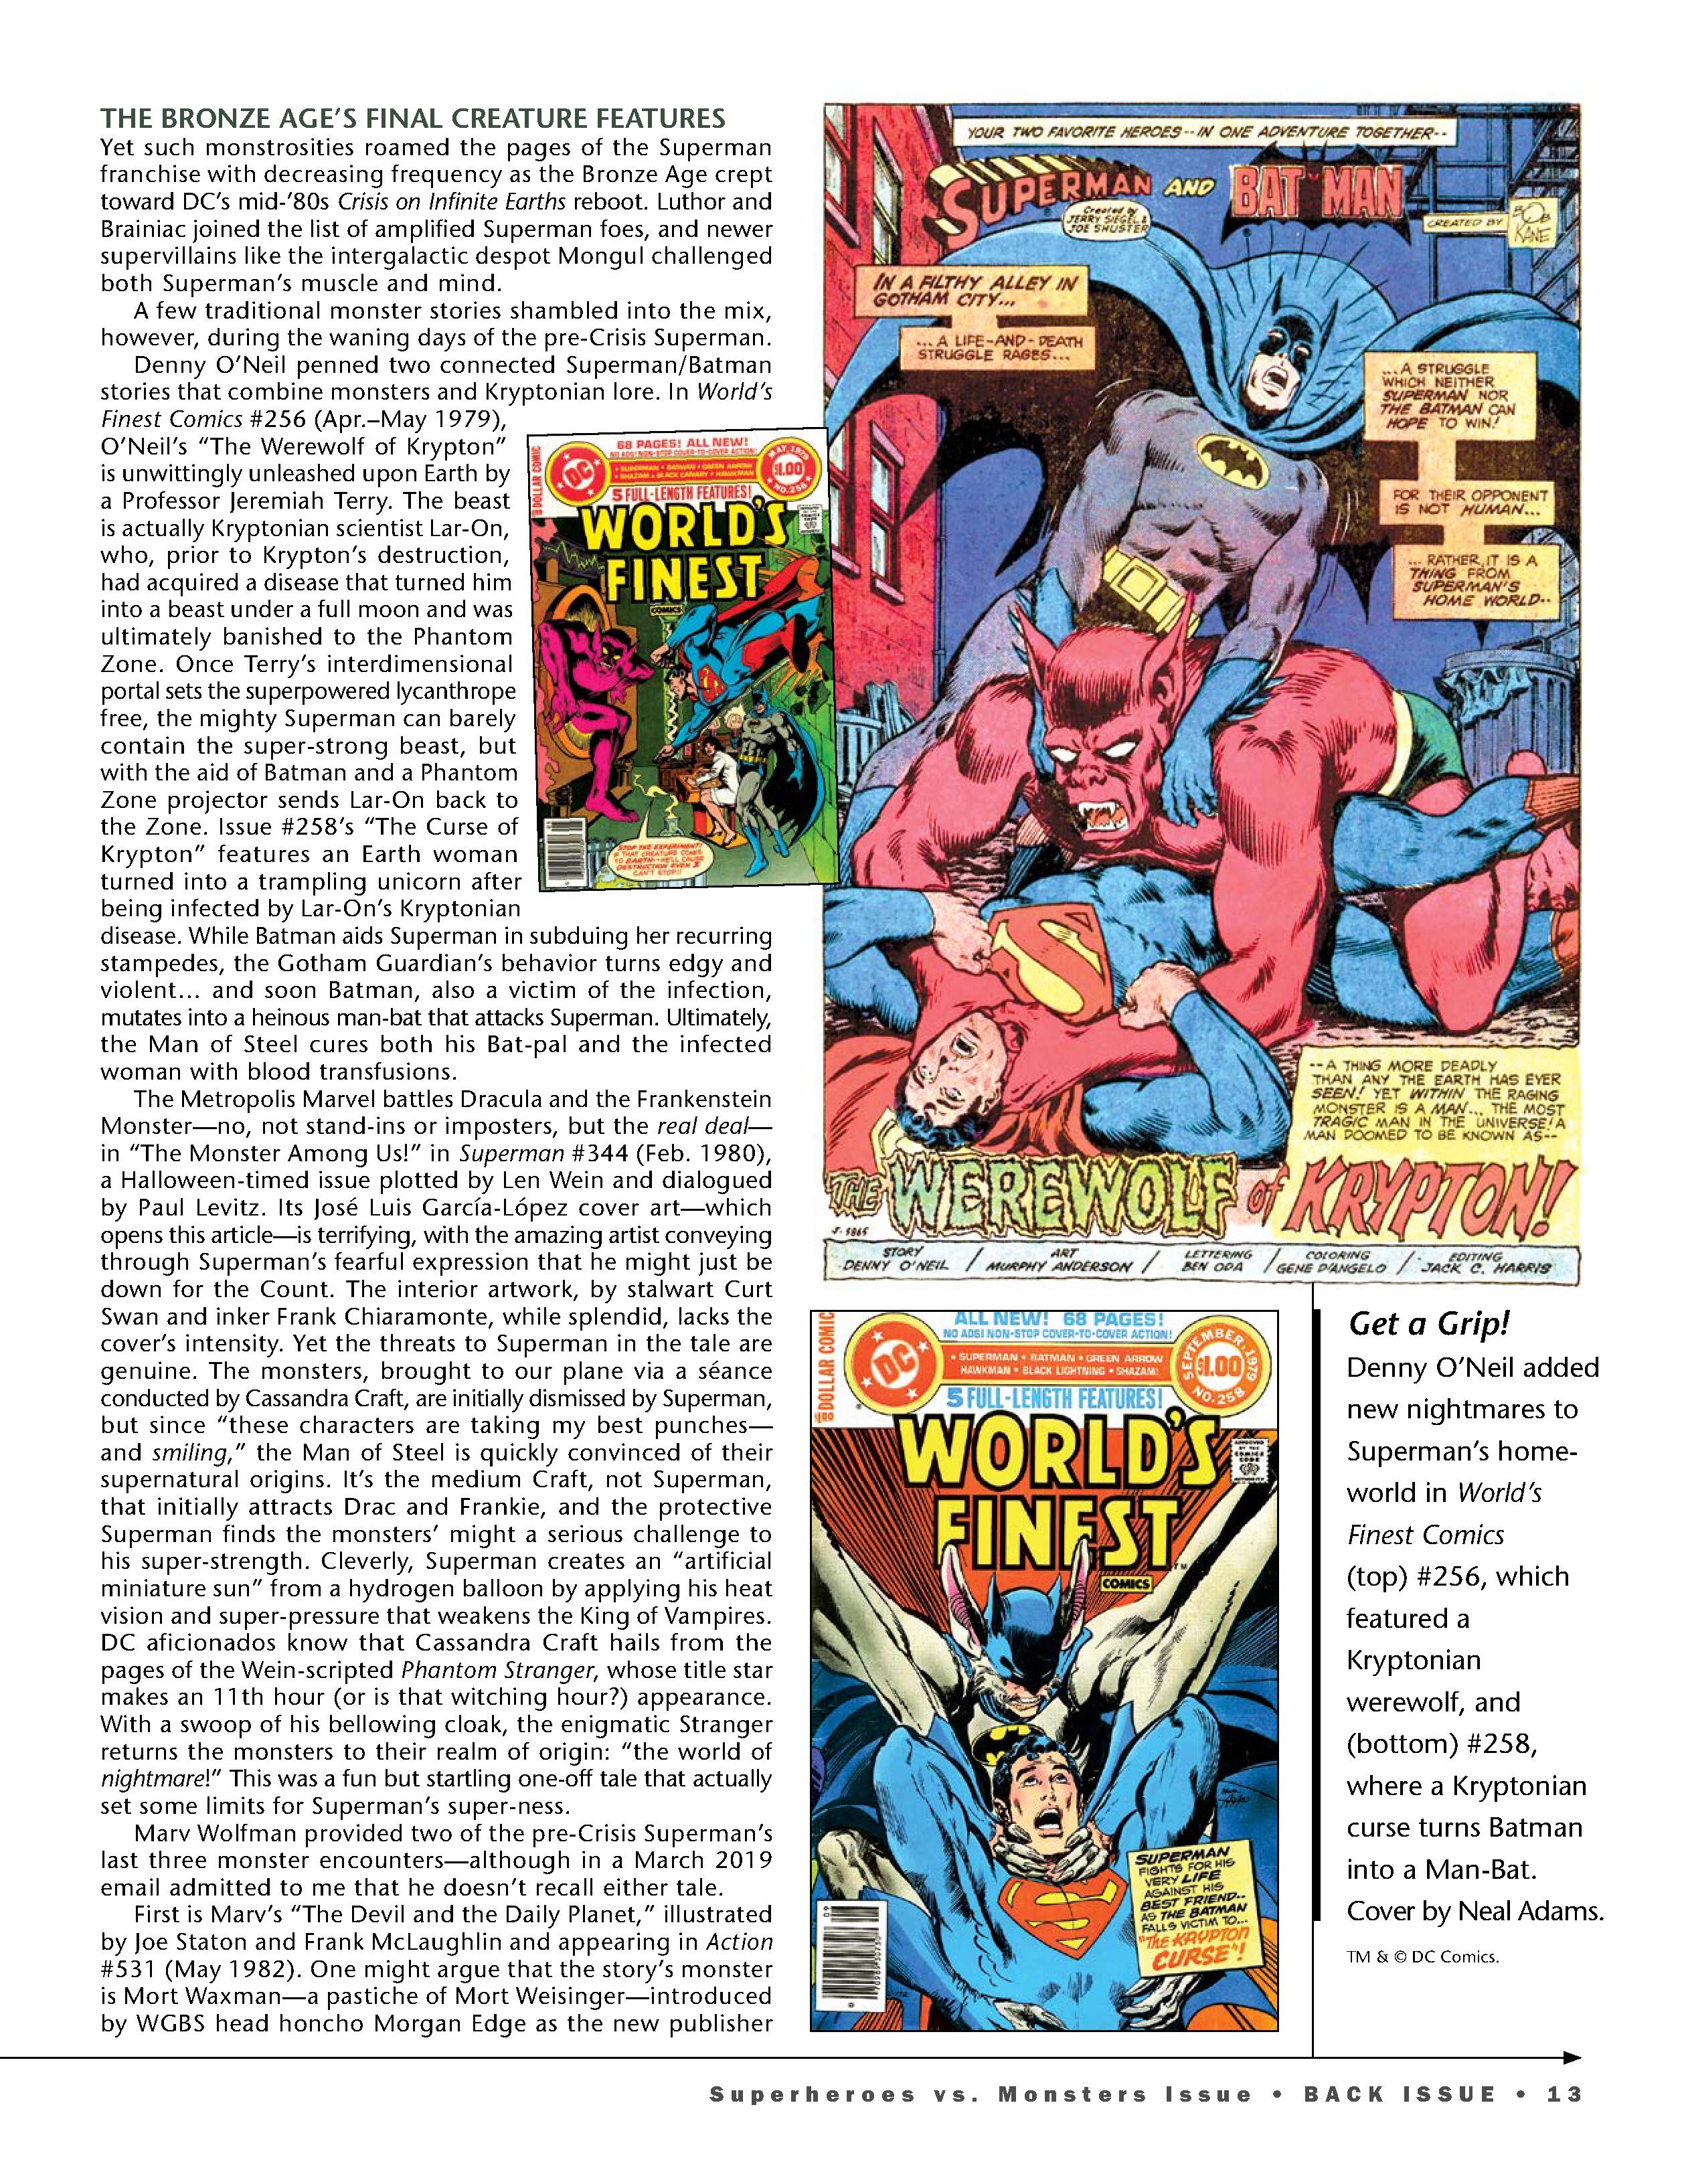 Read online Back Issue comic -  Issue #116 - 15